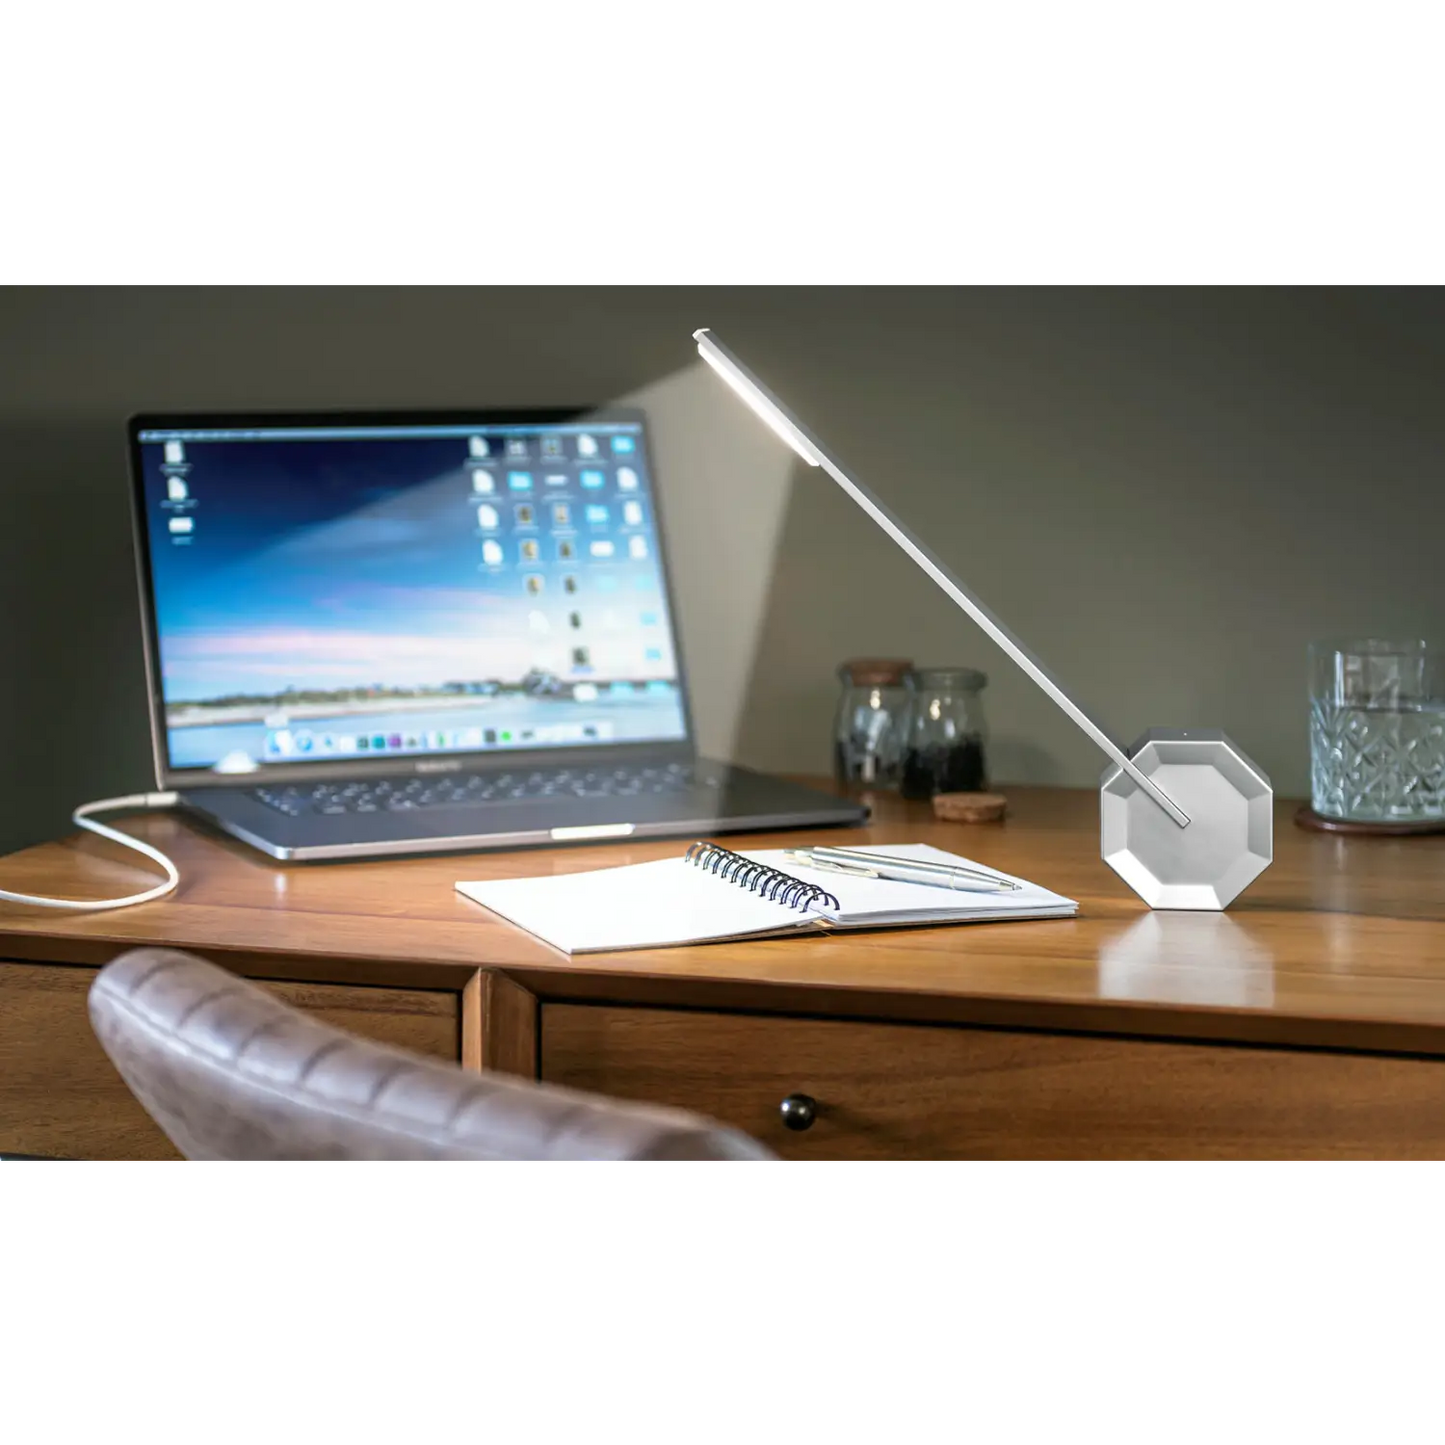 Gingko Octagon One Rechargeable Desk Lamp (Aluminum Silver